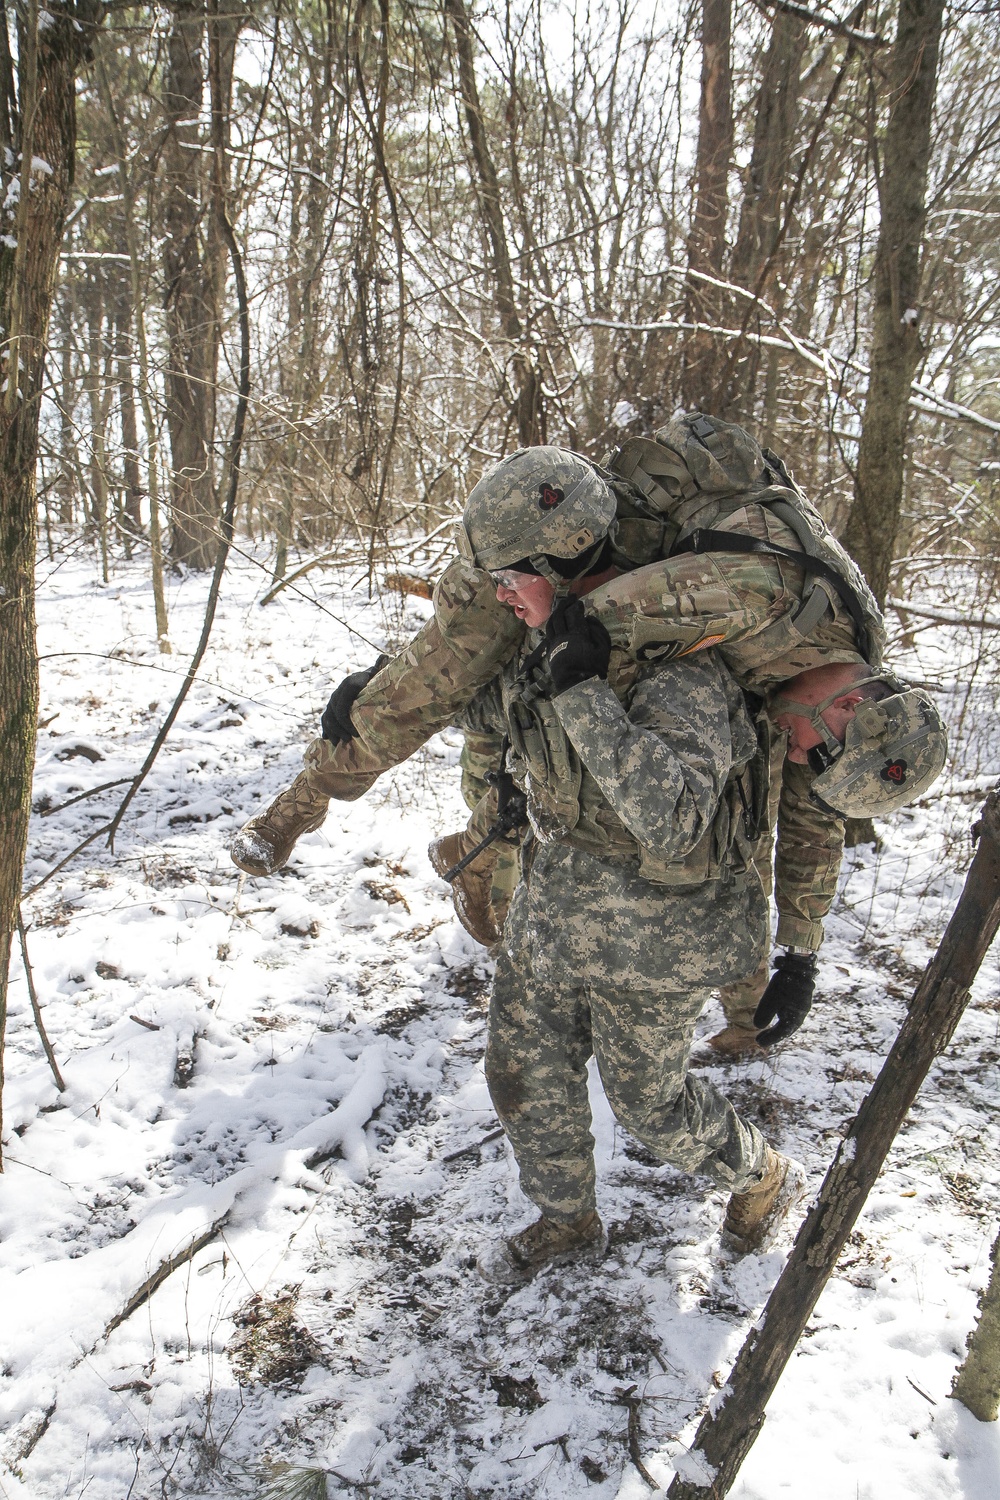 1-506th prepares for JRTC